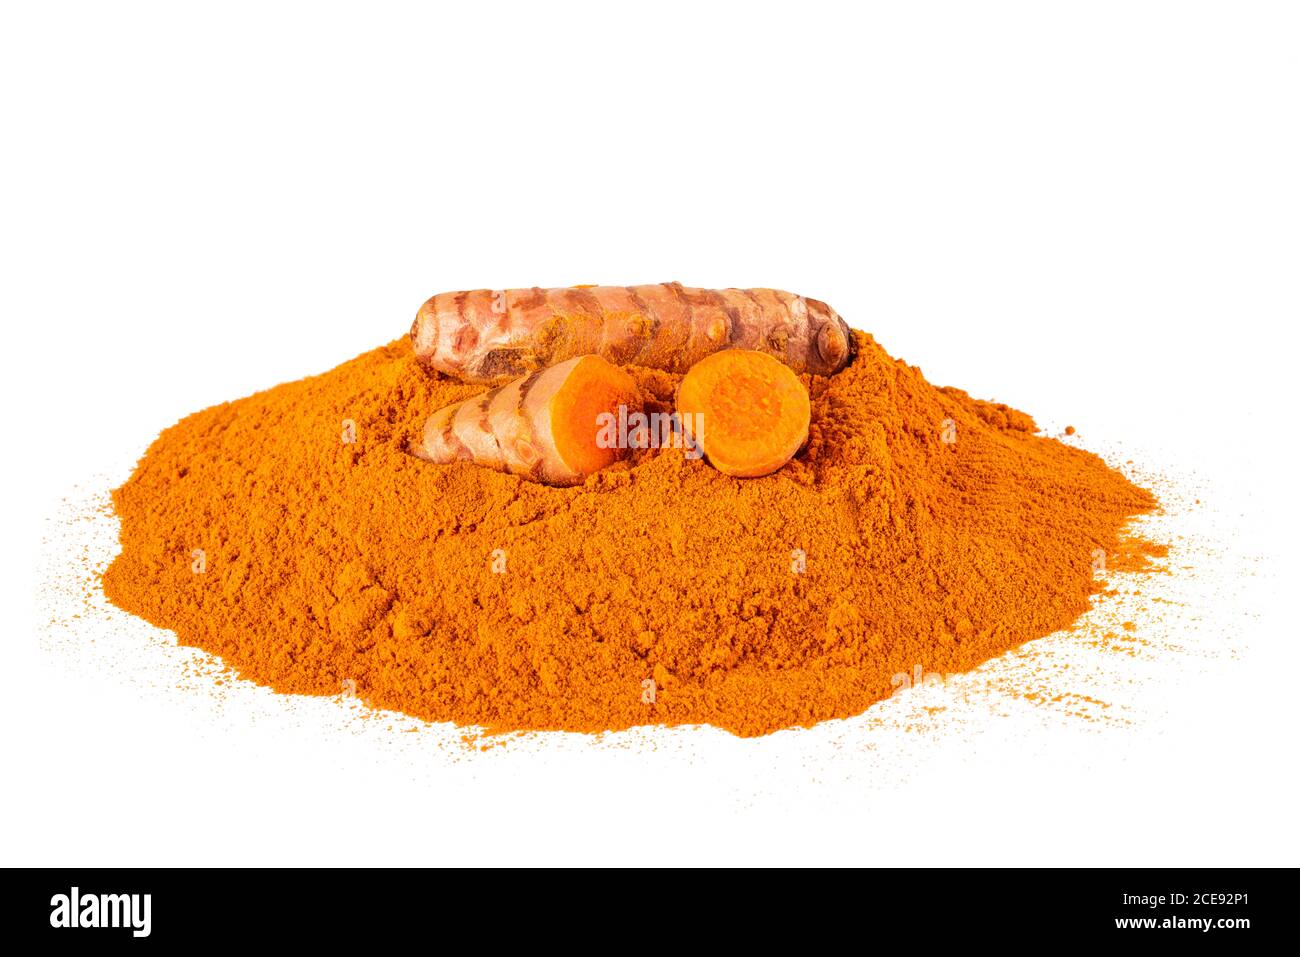 Curcuma powder with roots isolated on white Stock Photo